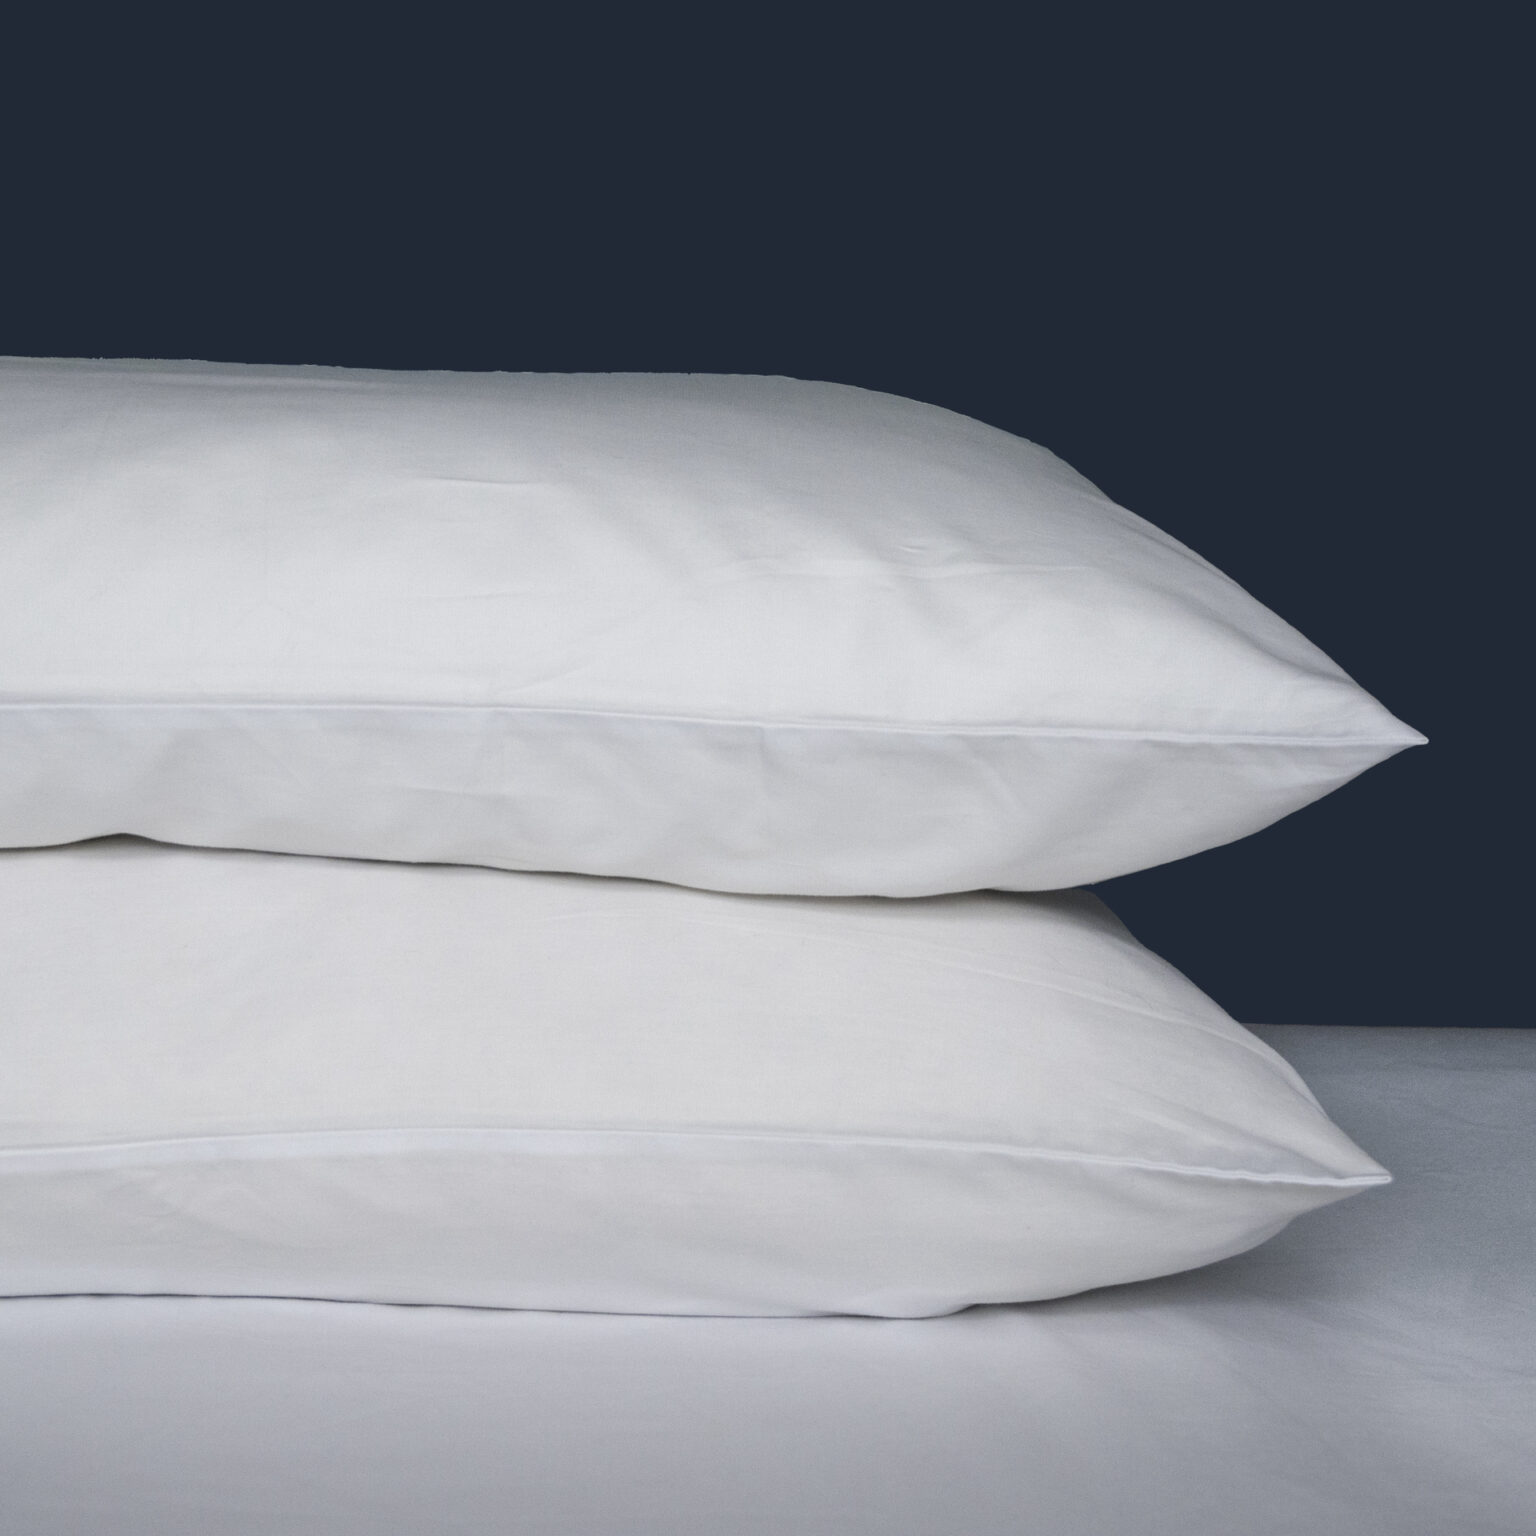 So, if you are trying to find the best pillow and pillow case, what are the three things to look for? We’ve got a great list for you.